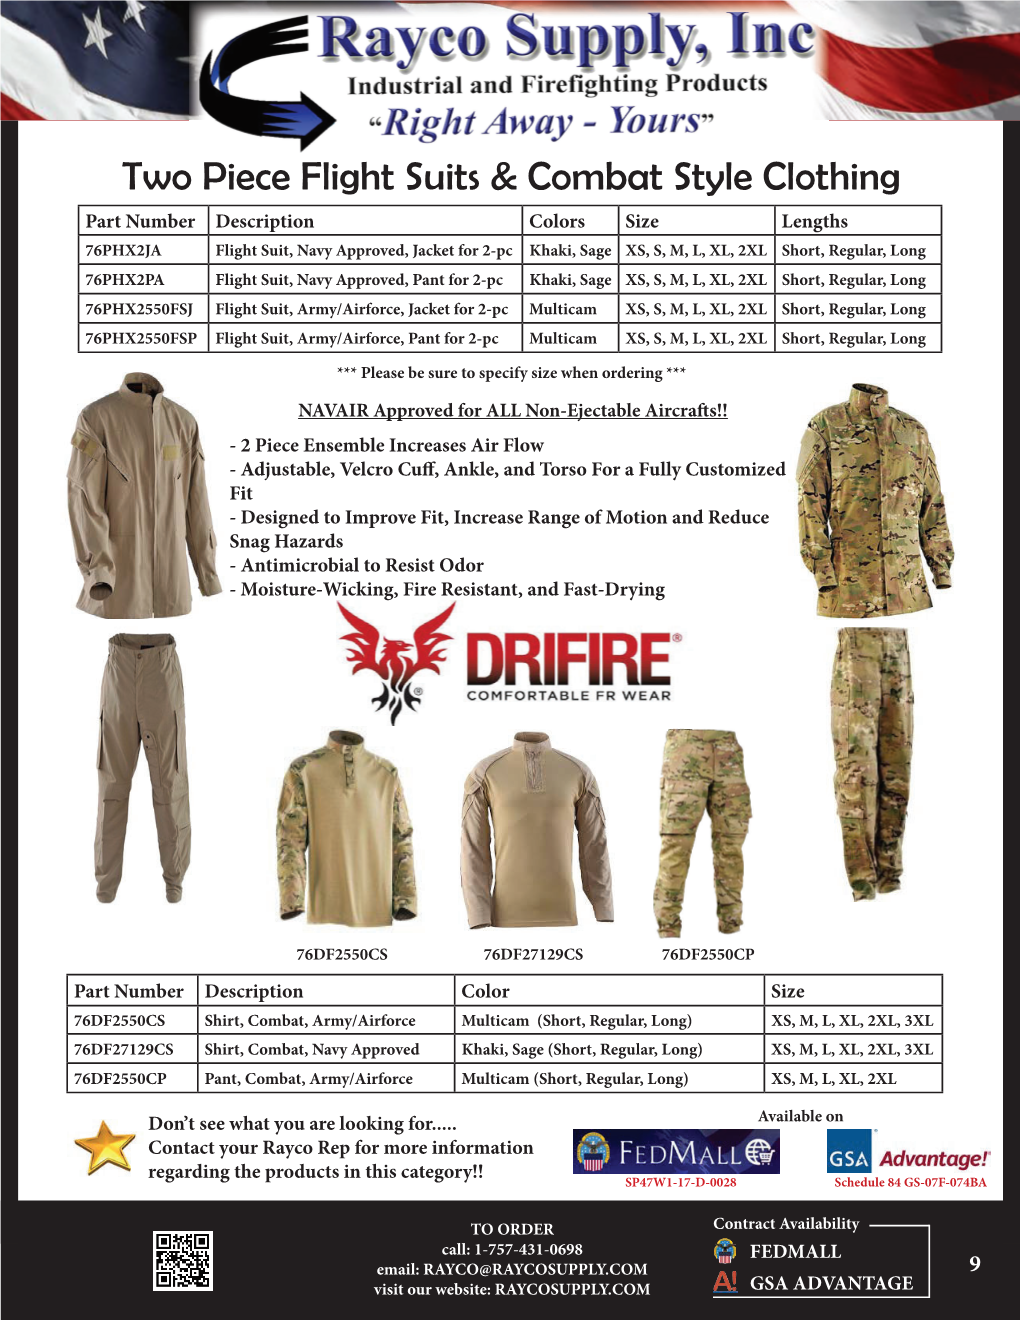 Two Piece Flight Suits & Combat Style Clothing